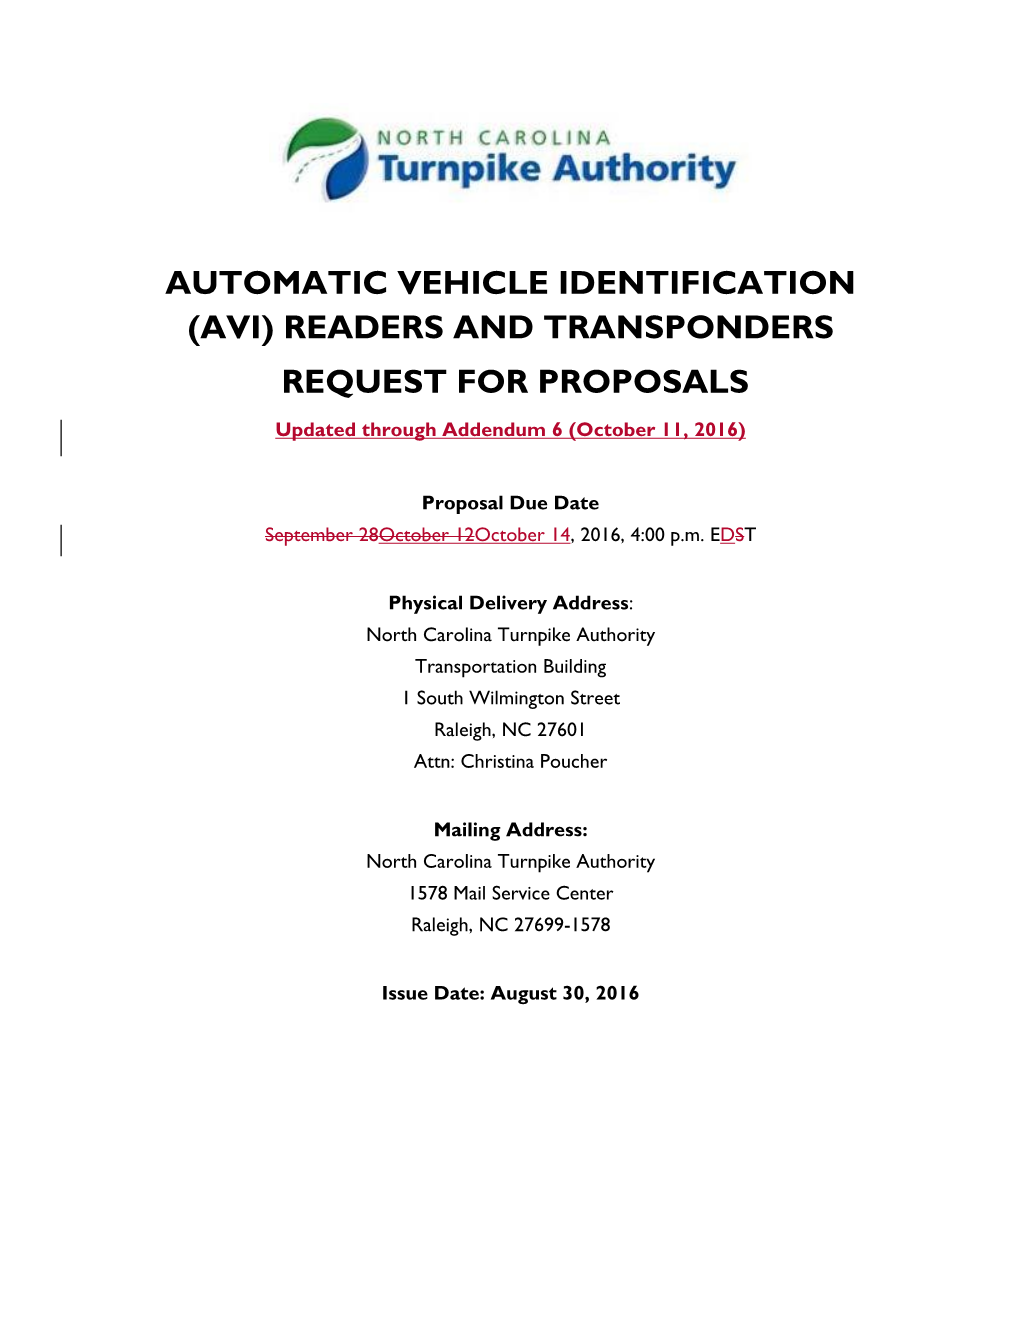 Avi) Readers and Transponders Request for Proposals